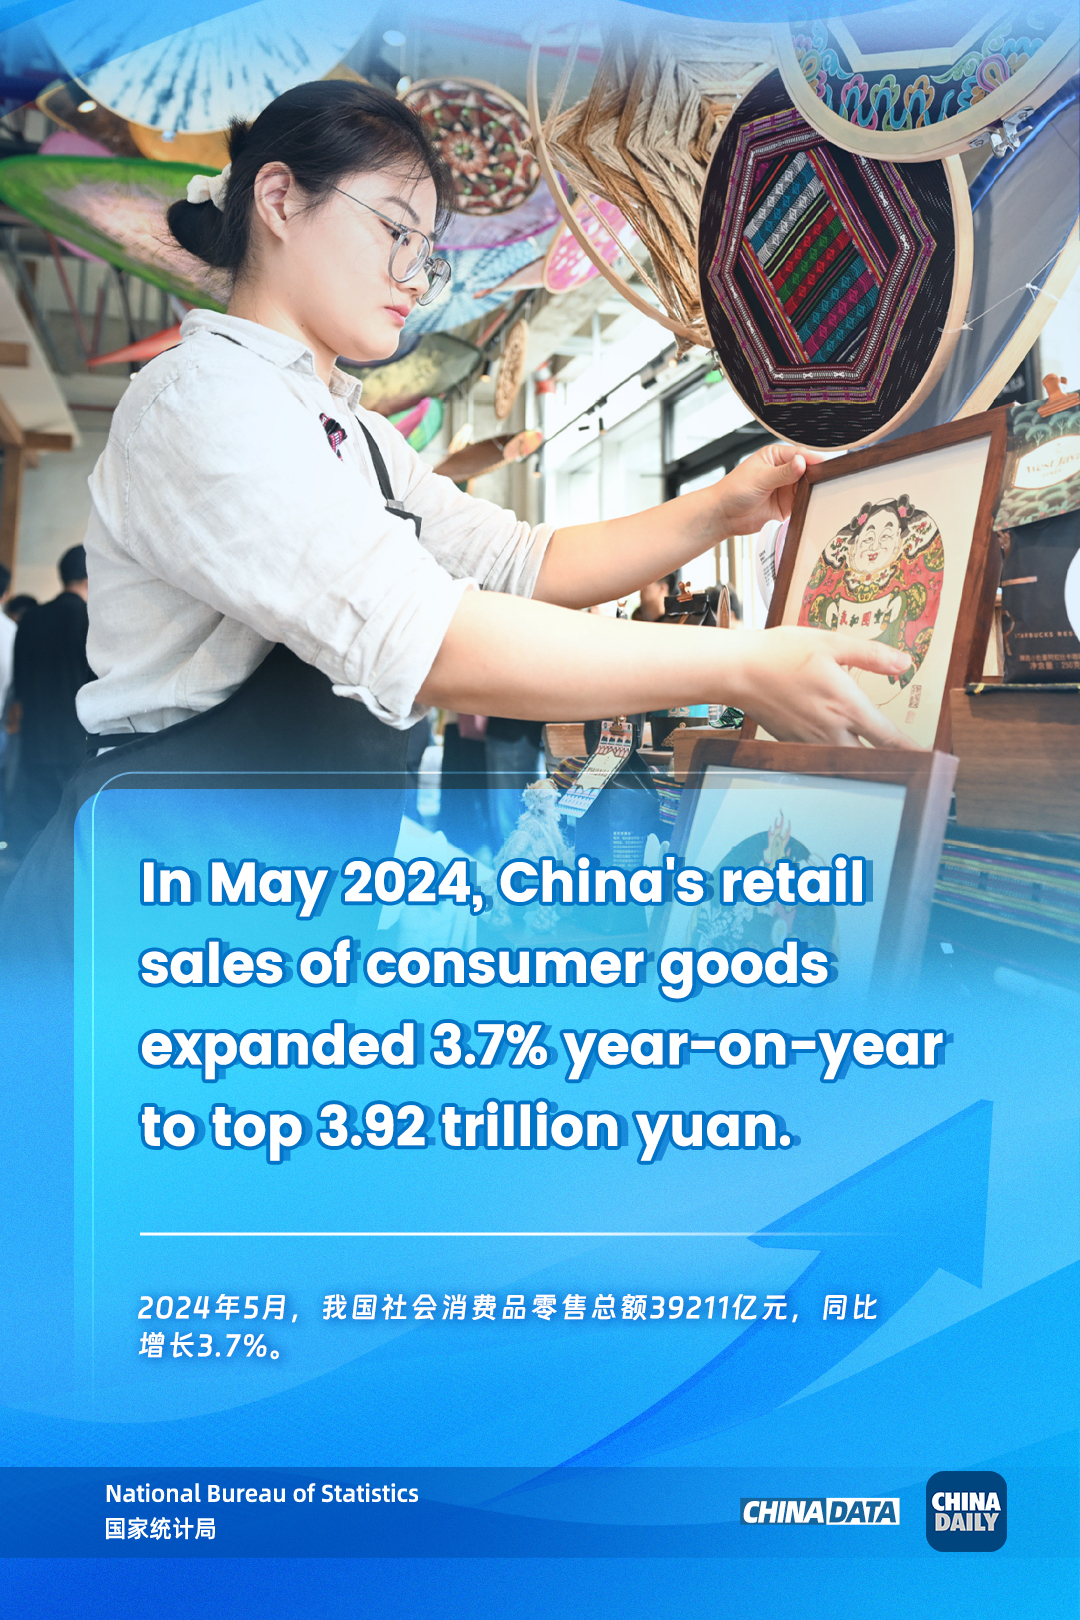 China's consumer market continues growing momentum